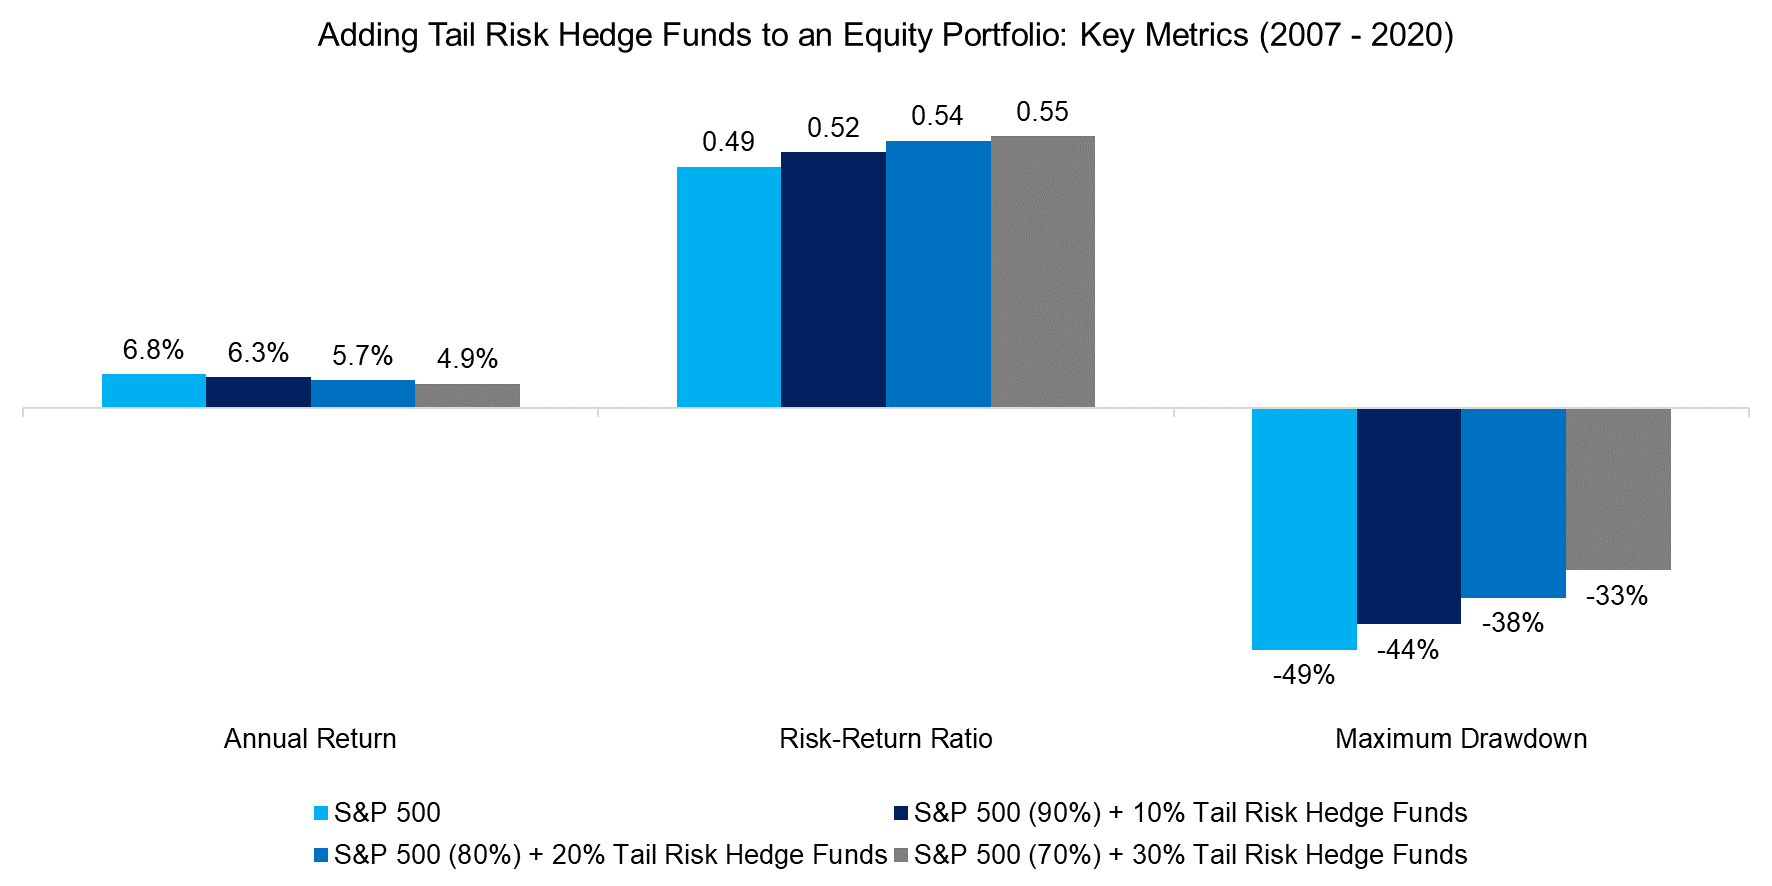 Adding Tail Risk Hedge Funds to an Equity Portfolio Key Metrics (2007 - 2020)